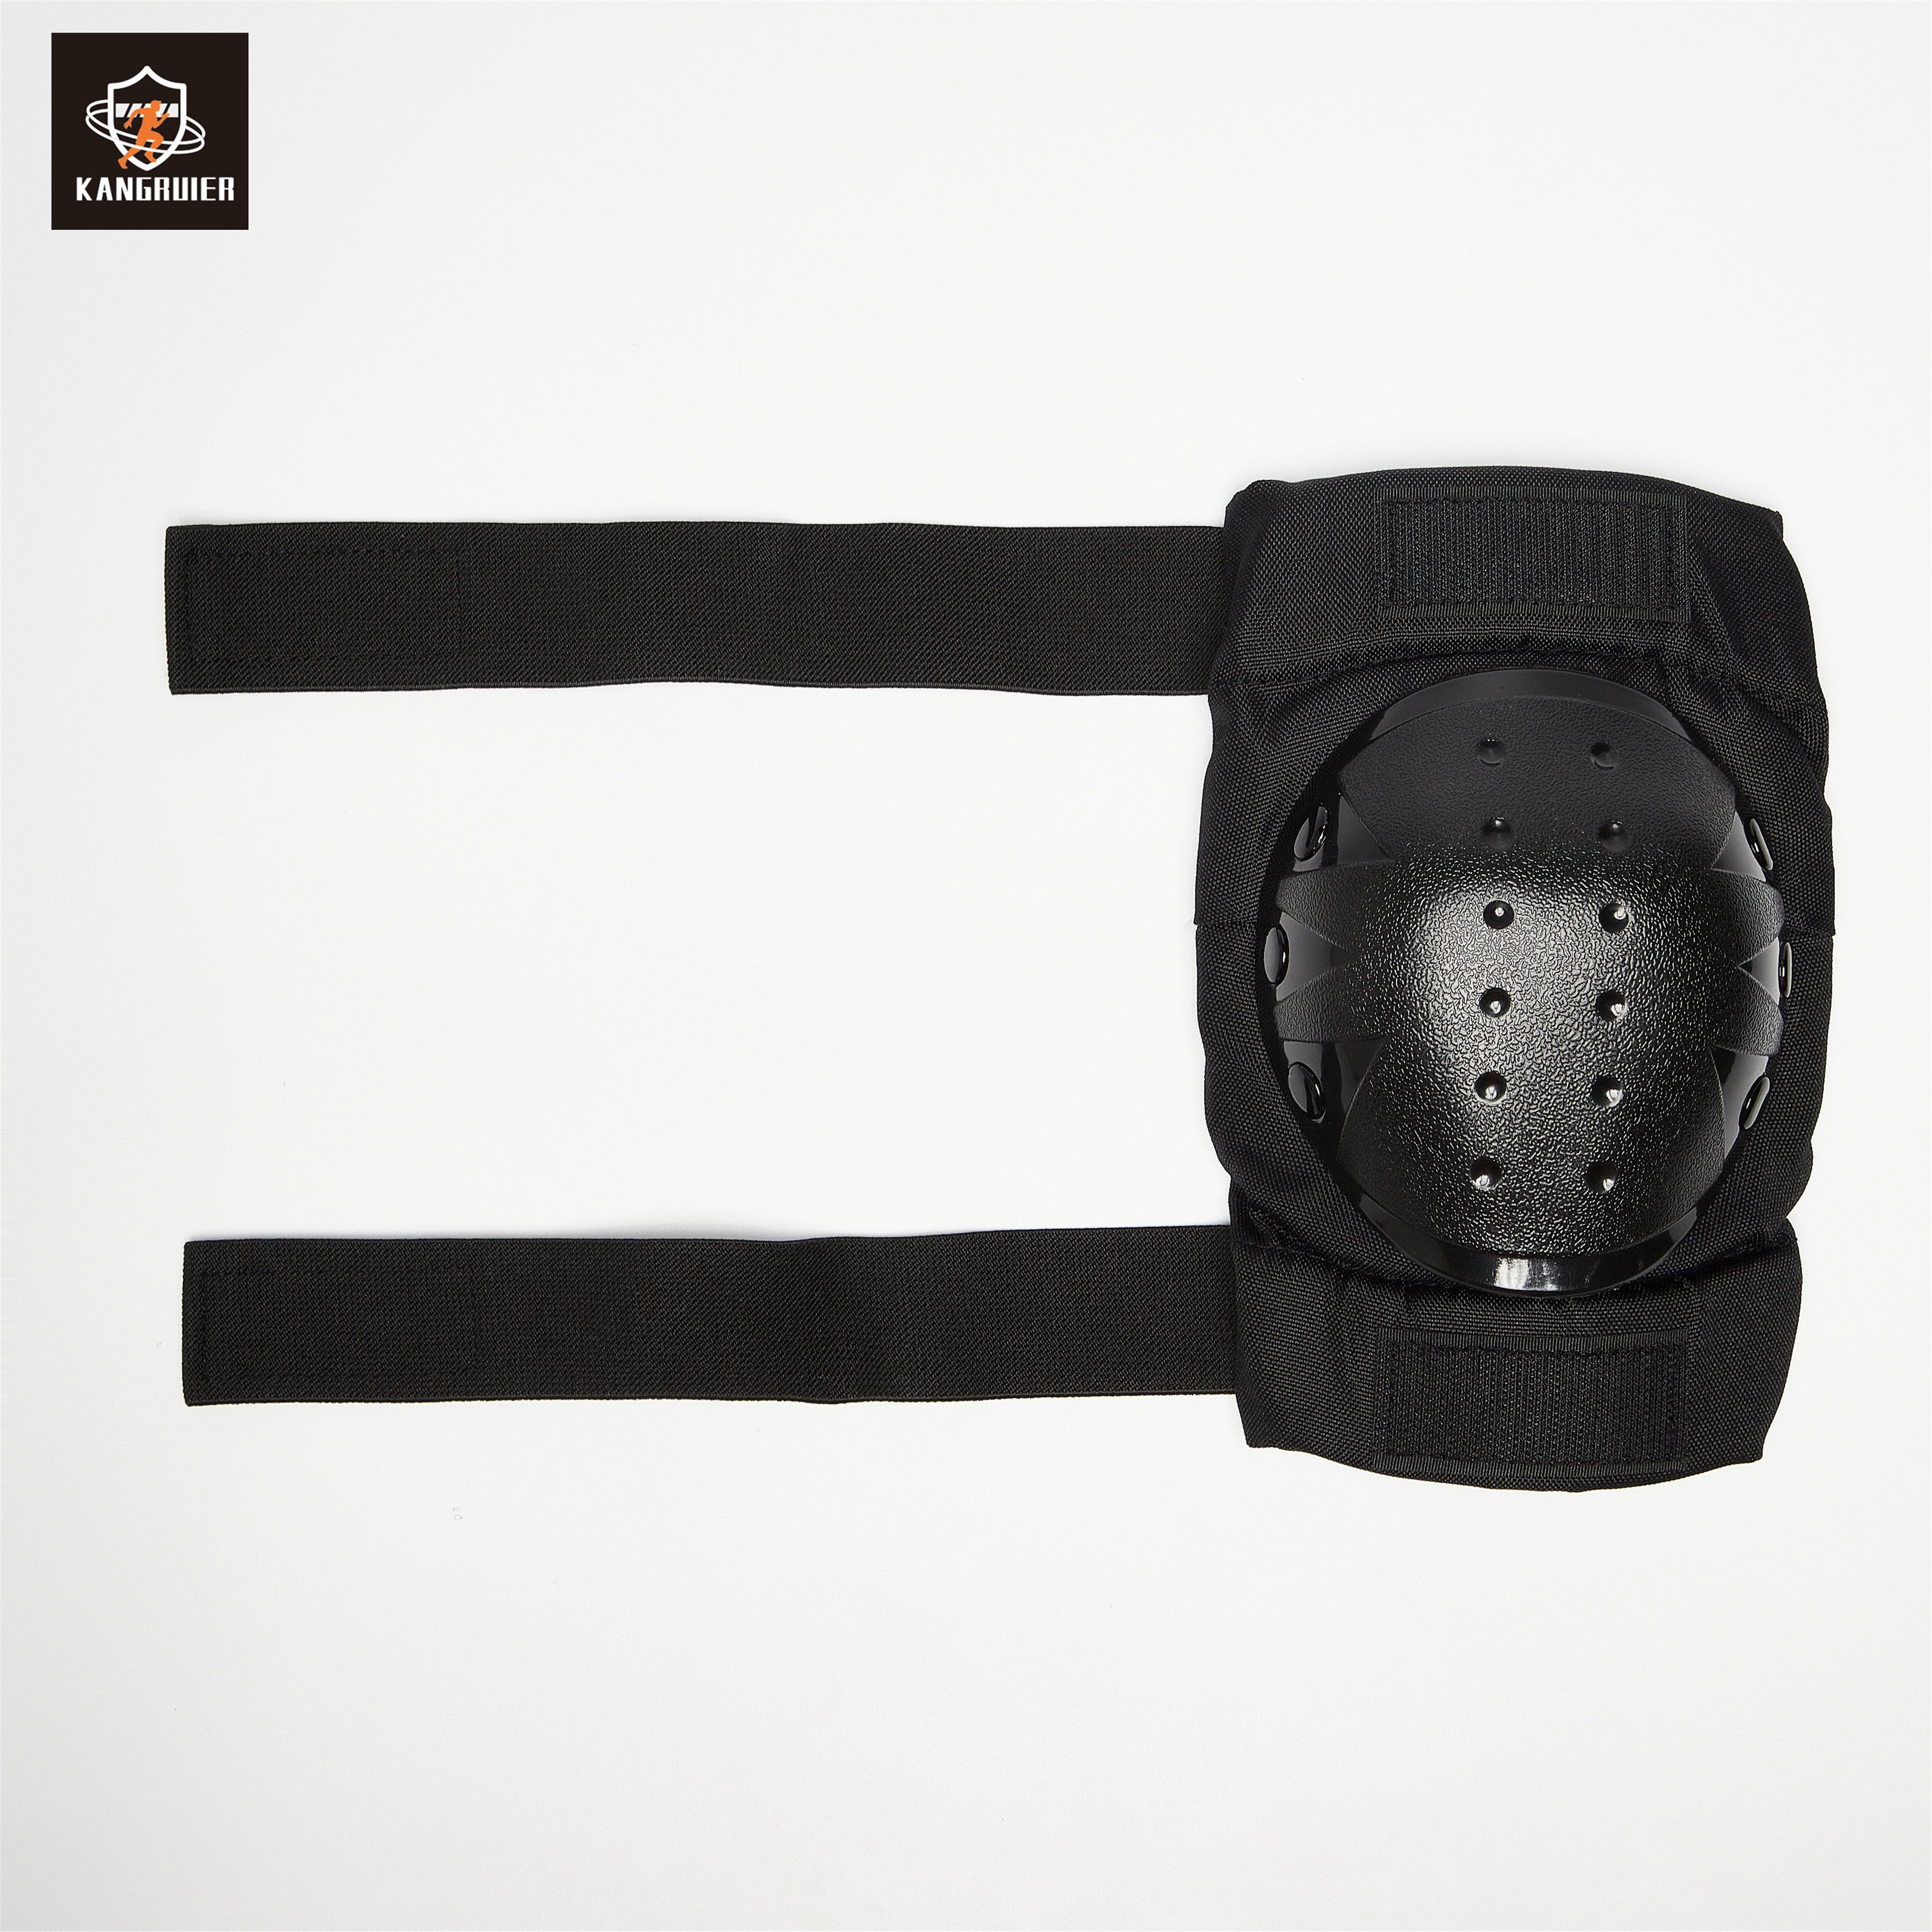 Knee and Elbow Pads & Wrist Guards for Multi Sports Protection